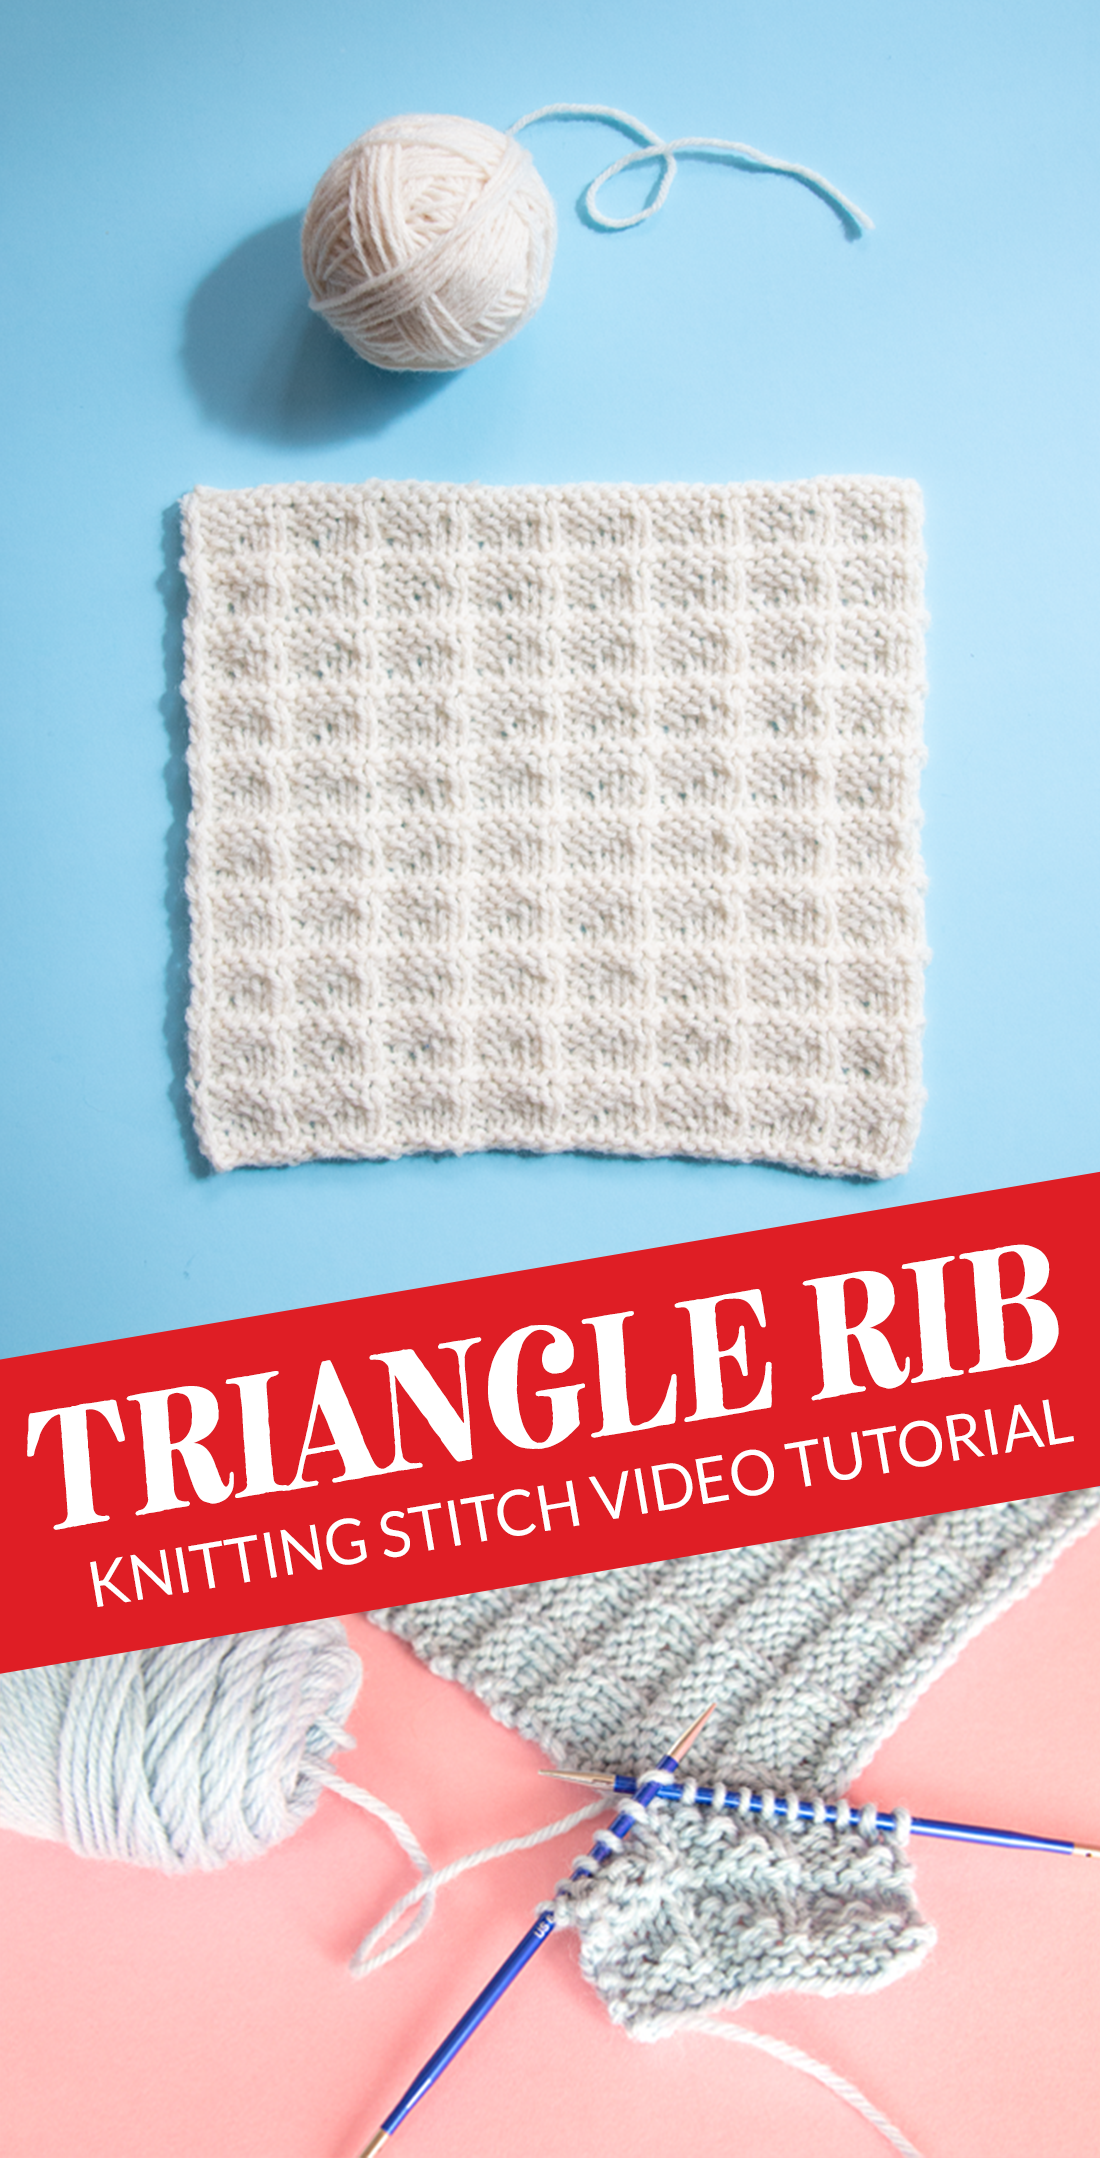 Heidi from Hands Occupied walks you through how to knit the triangle rib stitch in a beginner-friendly knitting video tutorial. 